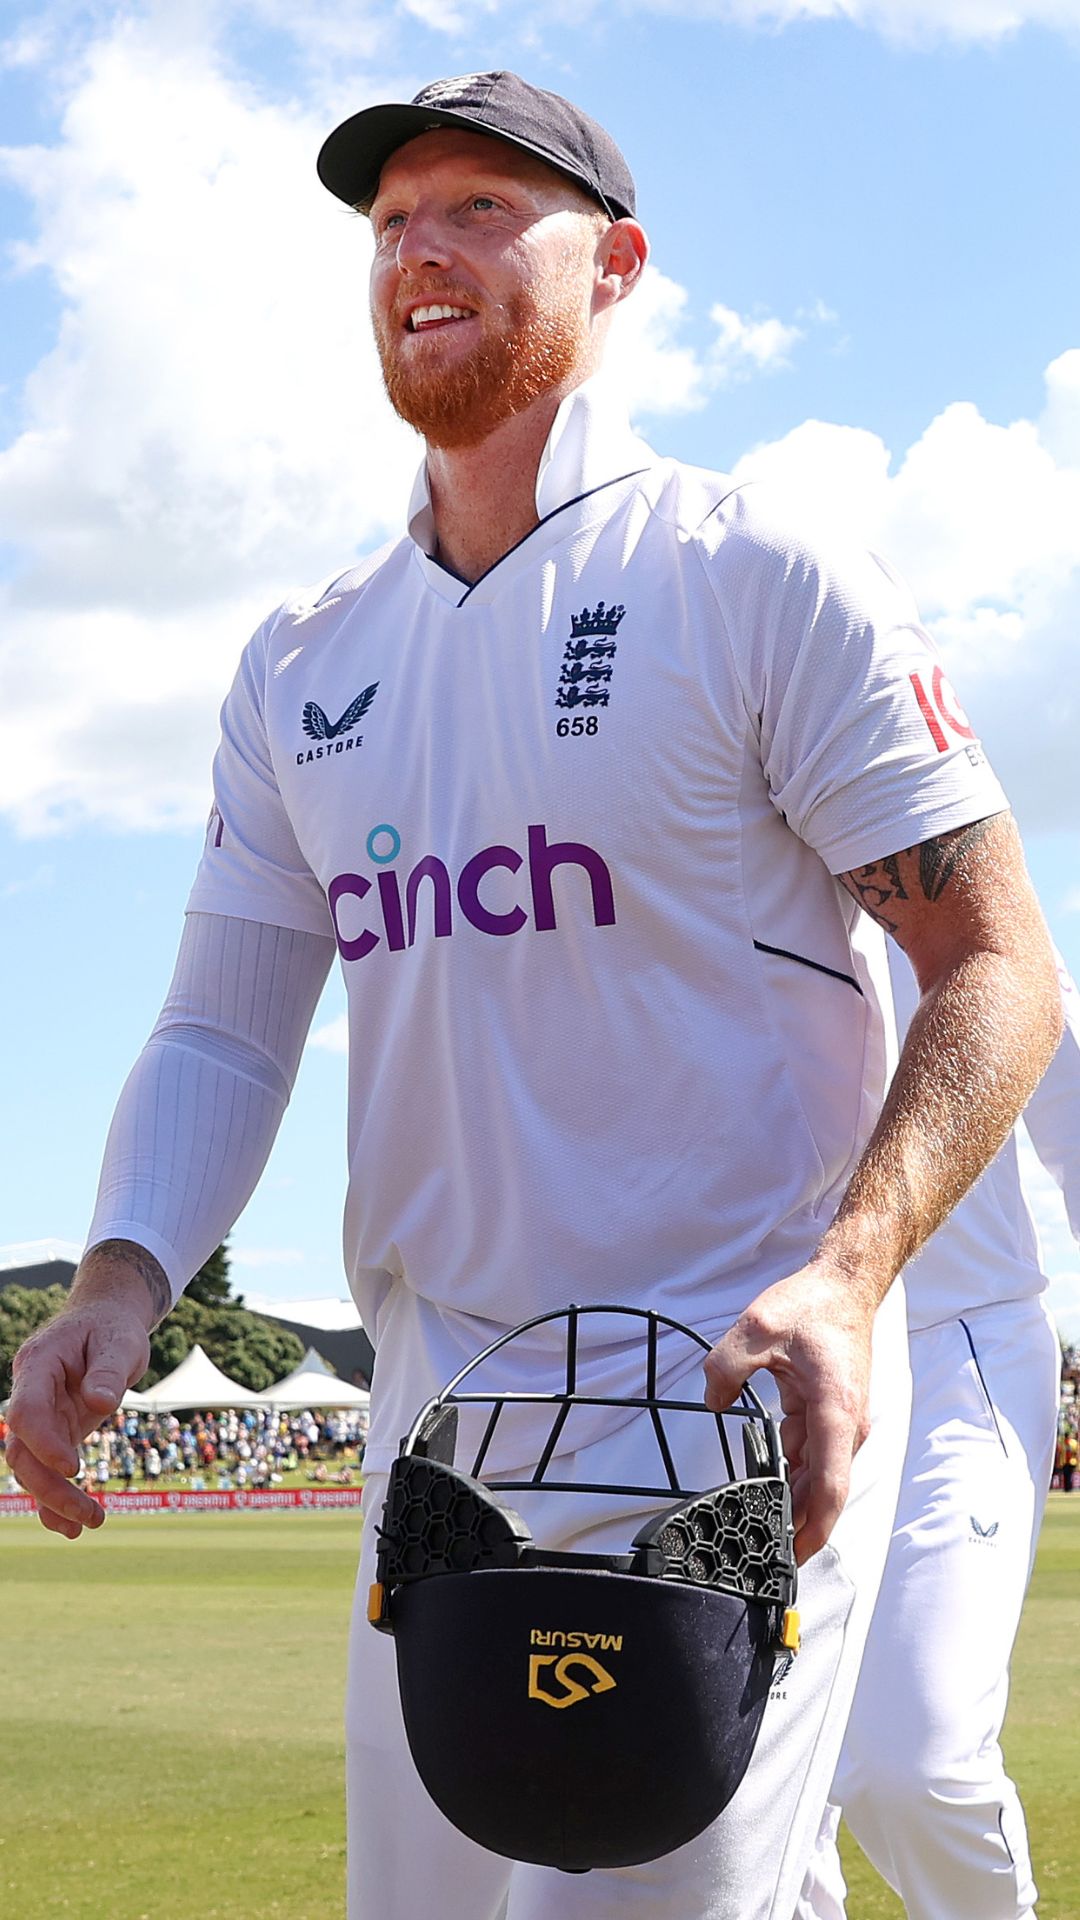 Top 5 innings, stats, and records by Ben Stokes as England Test captain turns 32